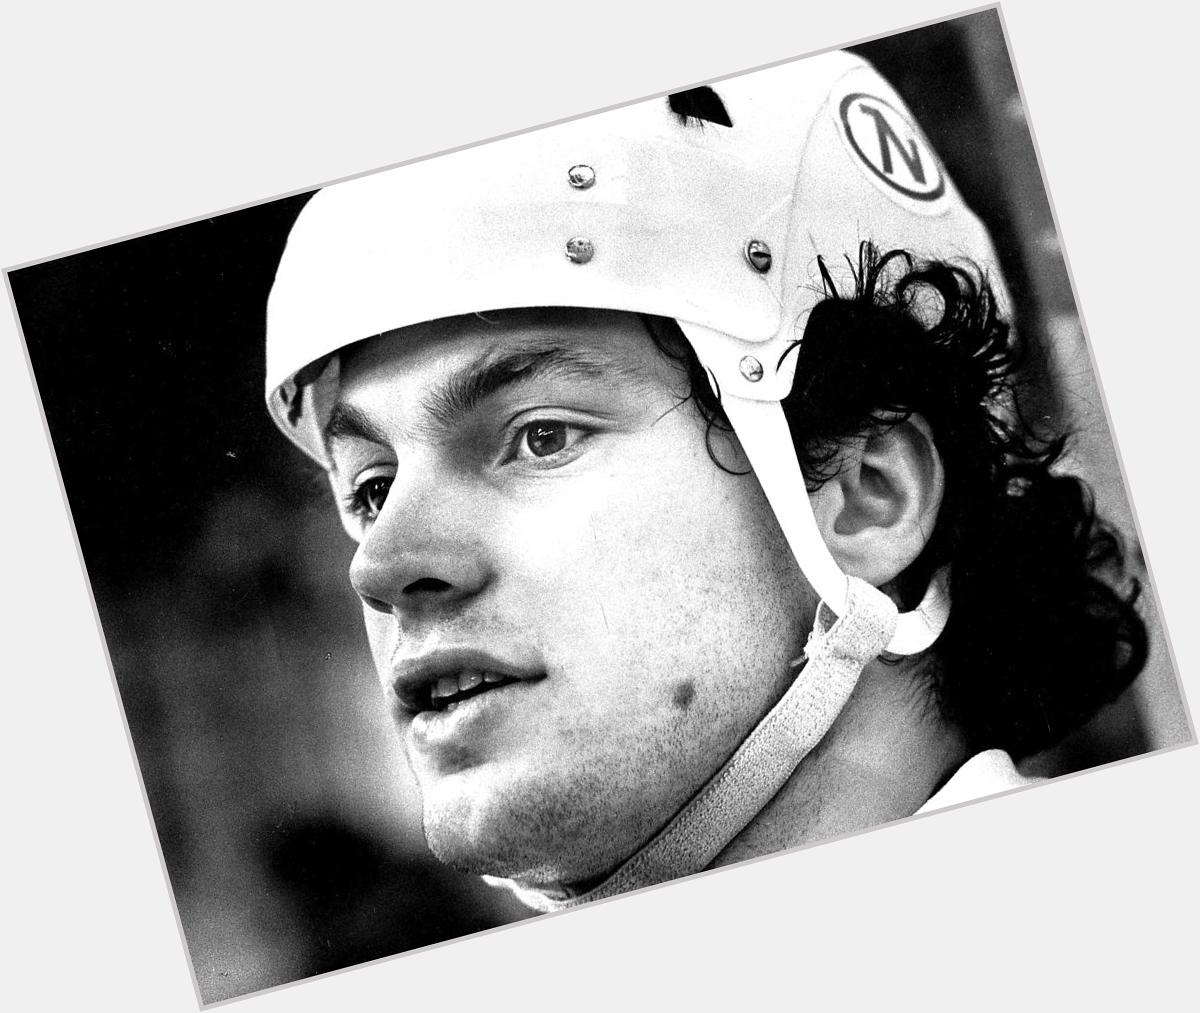 Happy birthday today to former Hall of Fame right winger - Dino Ciccarelli born in Sarnia, Ontario 